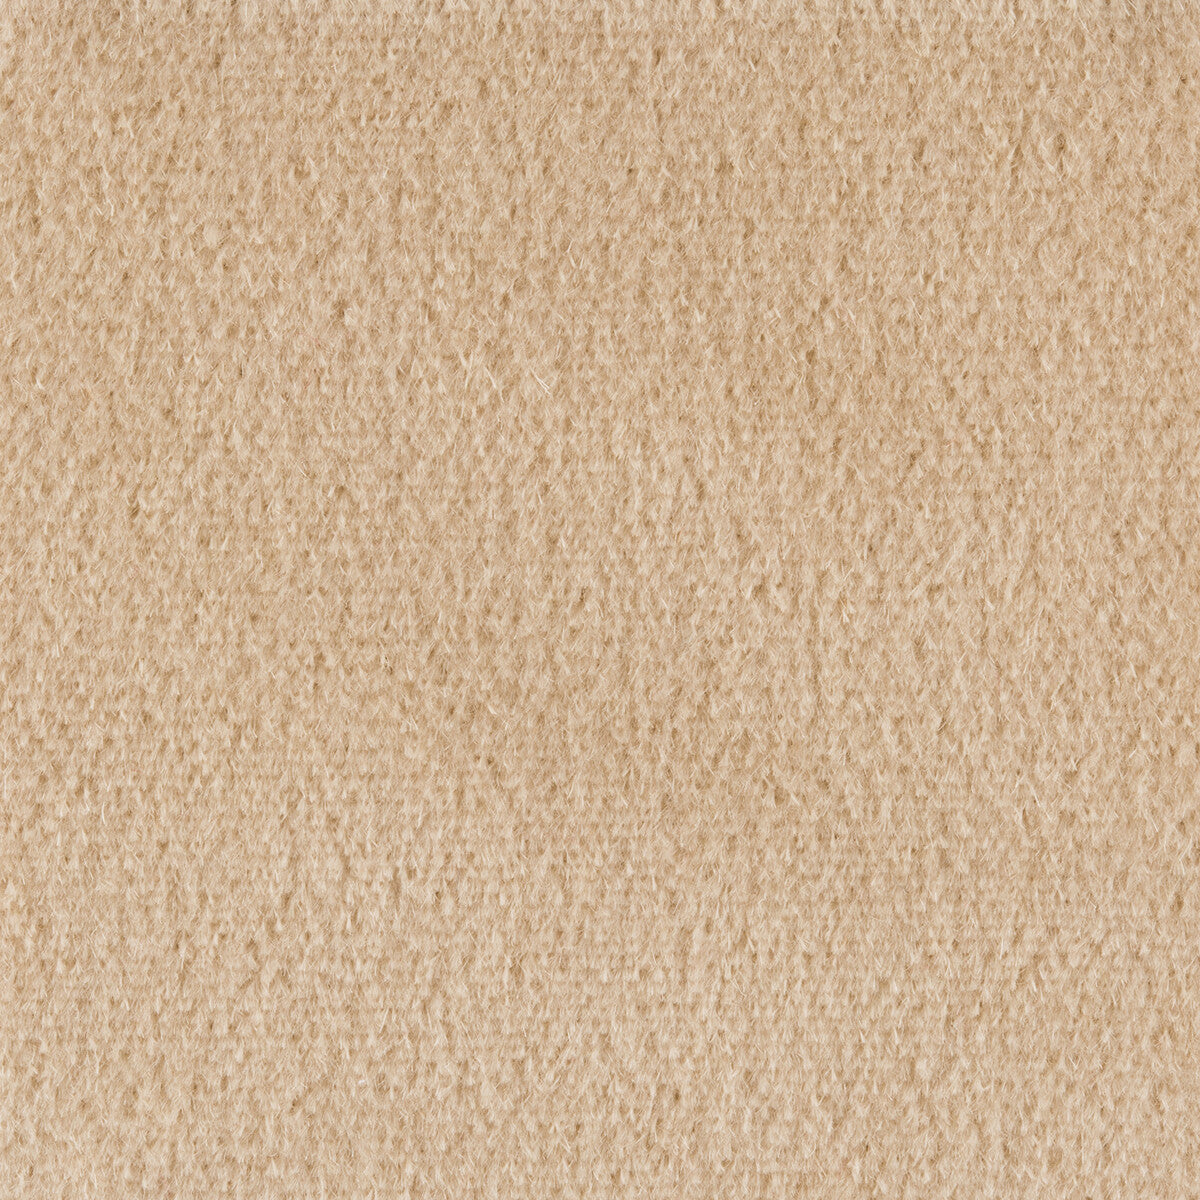 Plazzo Mohair fabric in limestone color - pattern 34259.018.0 - by Kravet Couture